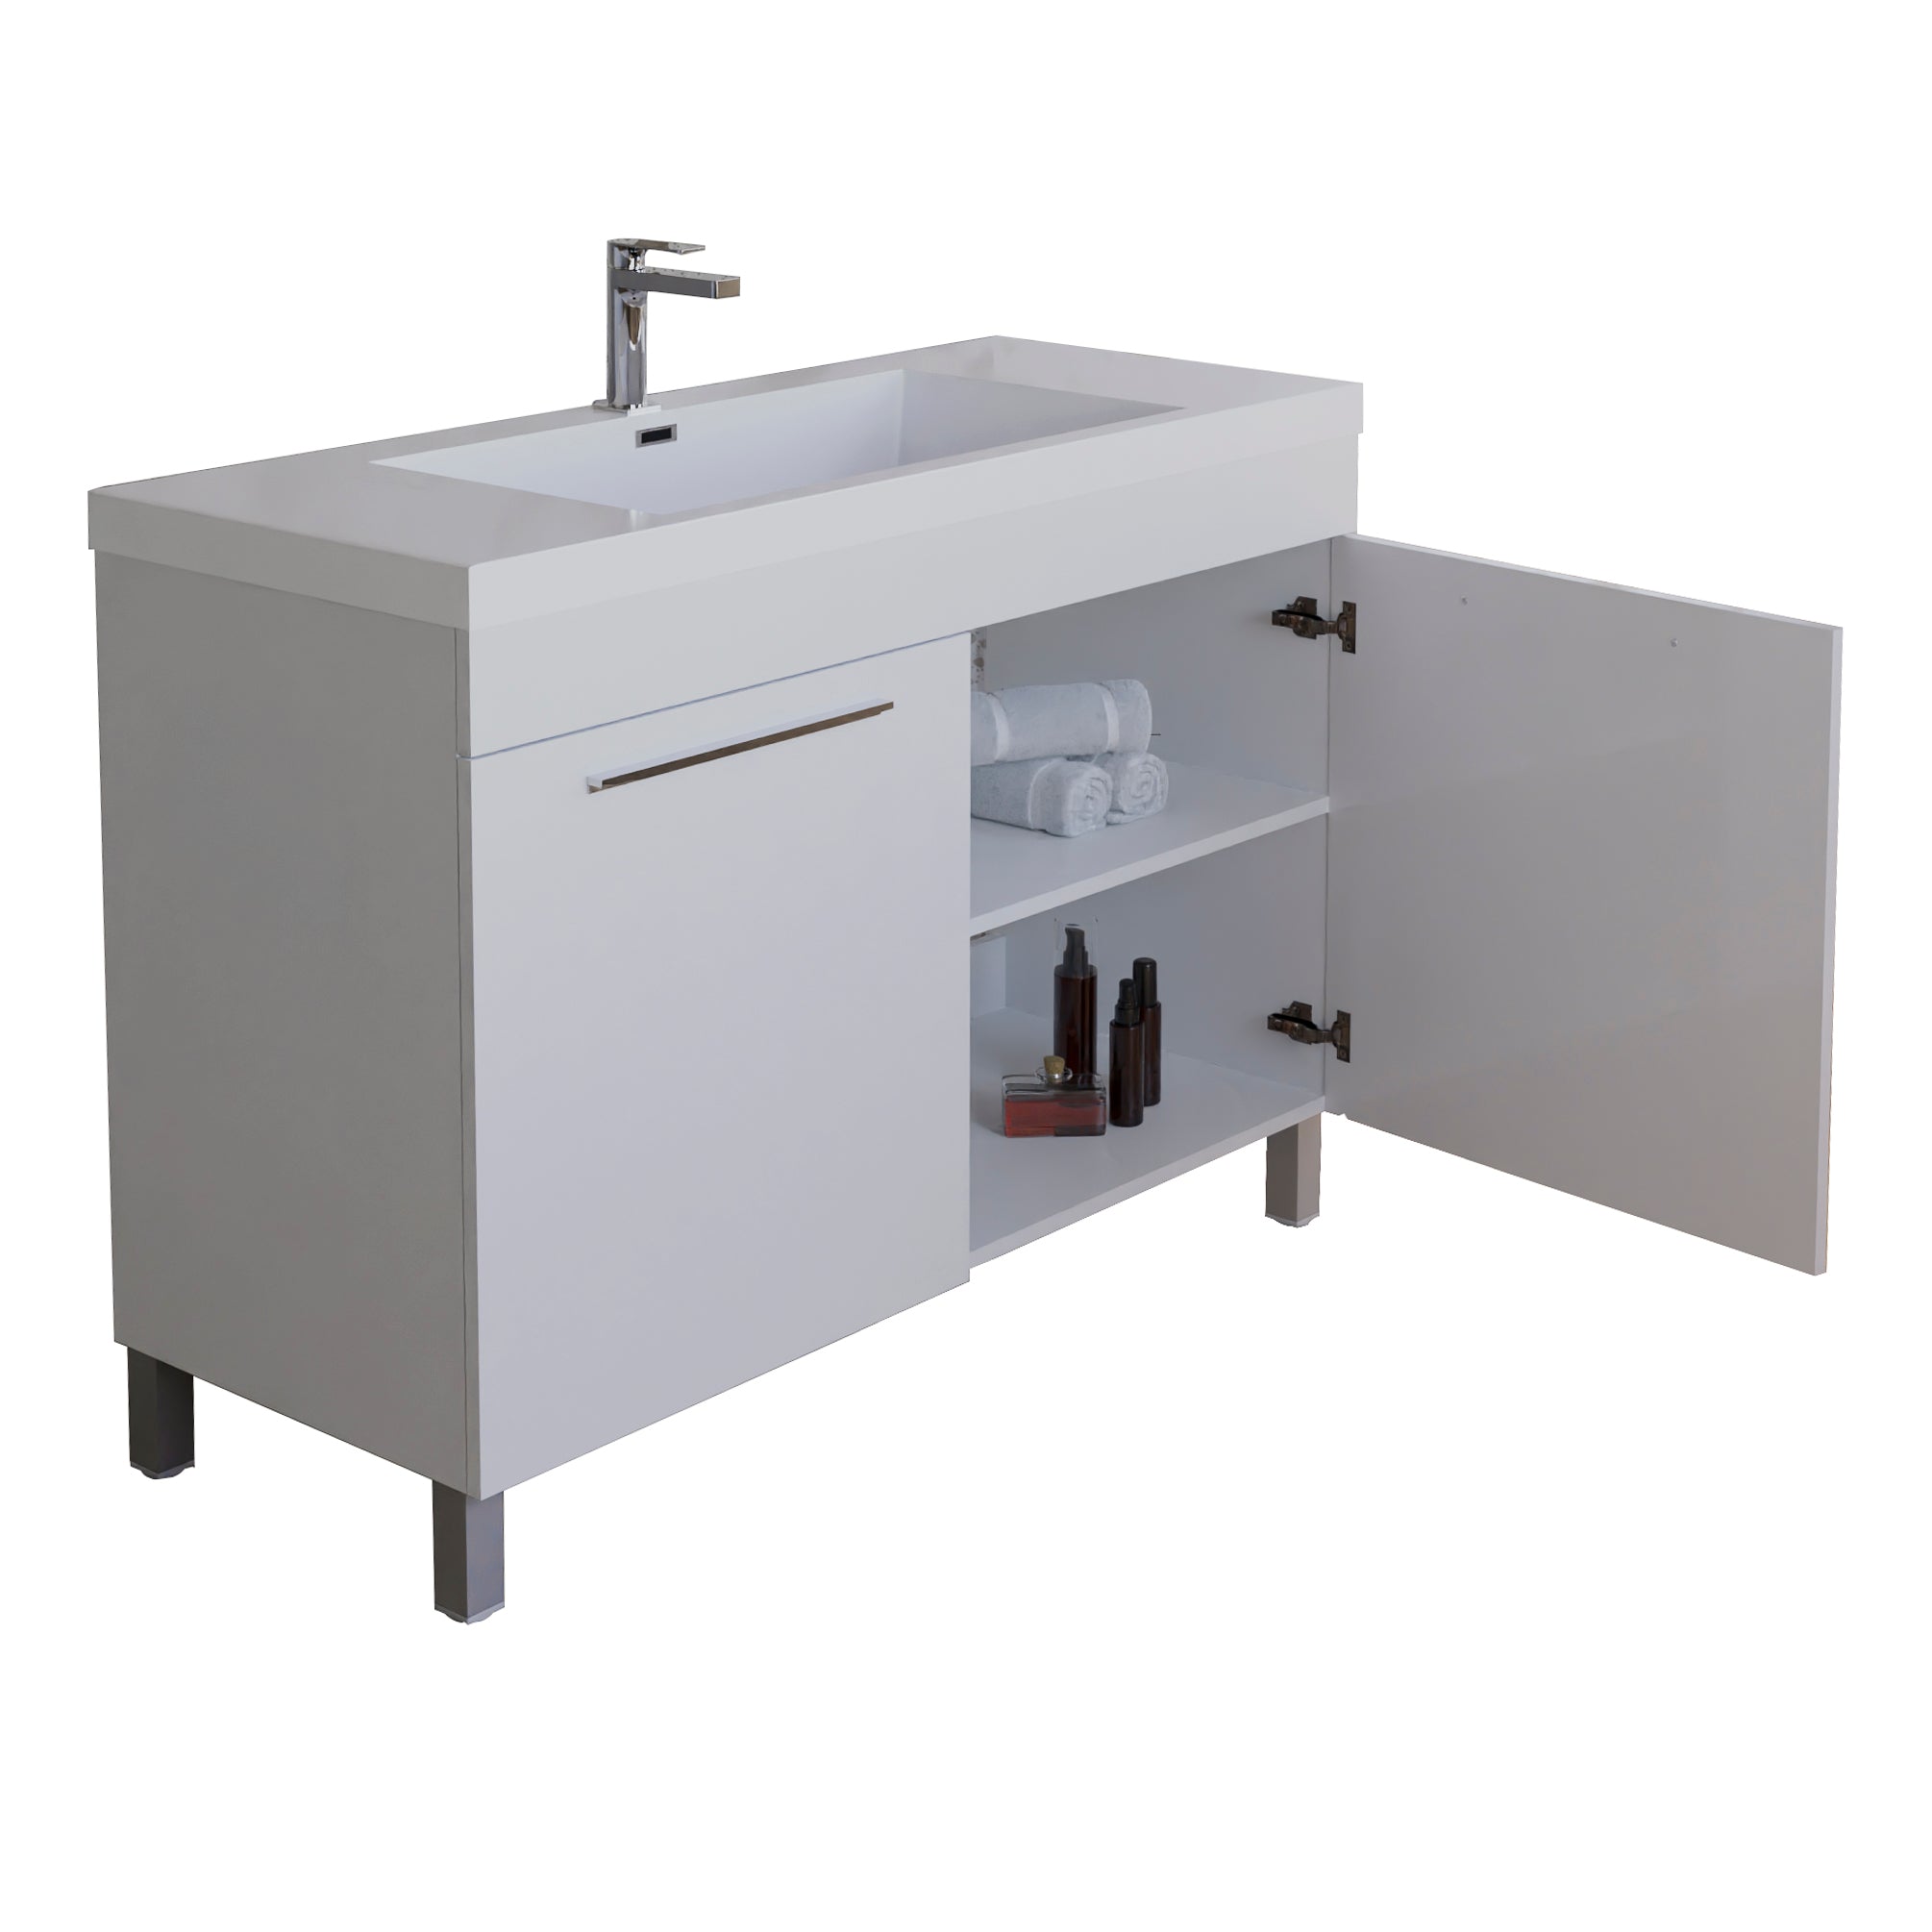 Ocean 47.5 White High Gloss Cabinet, Square Cultured Marble Sink, Free Standing Vanity Set